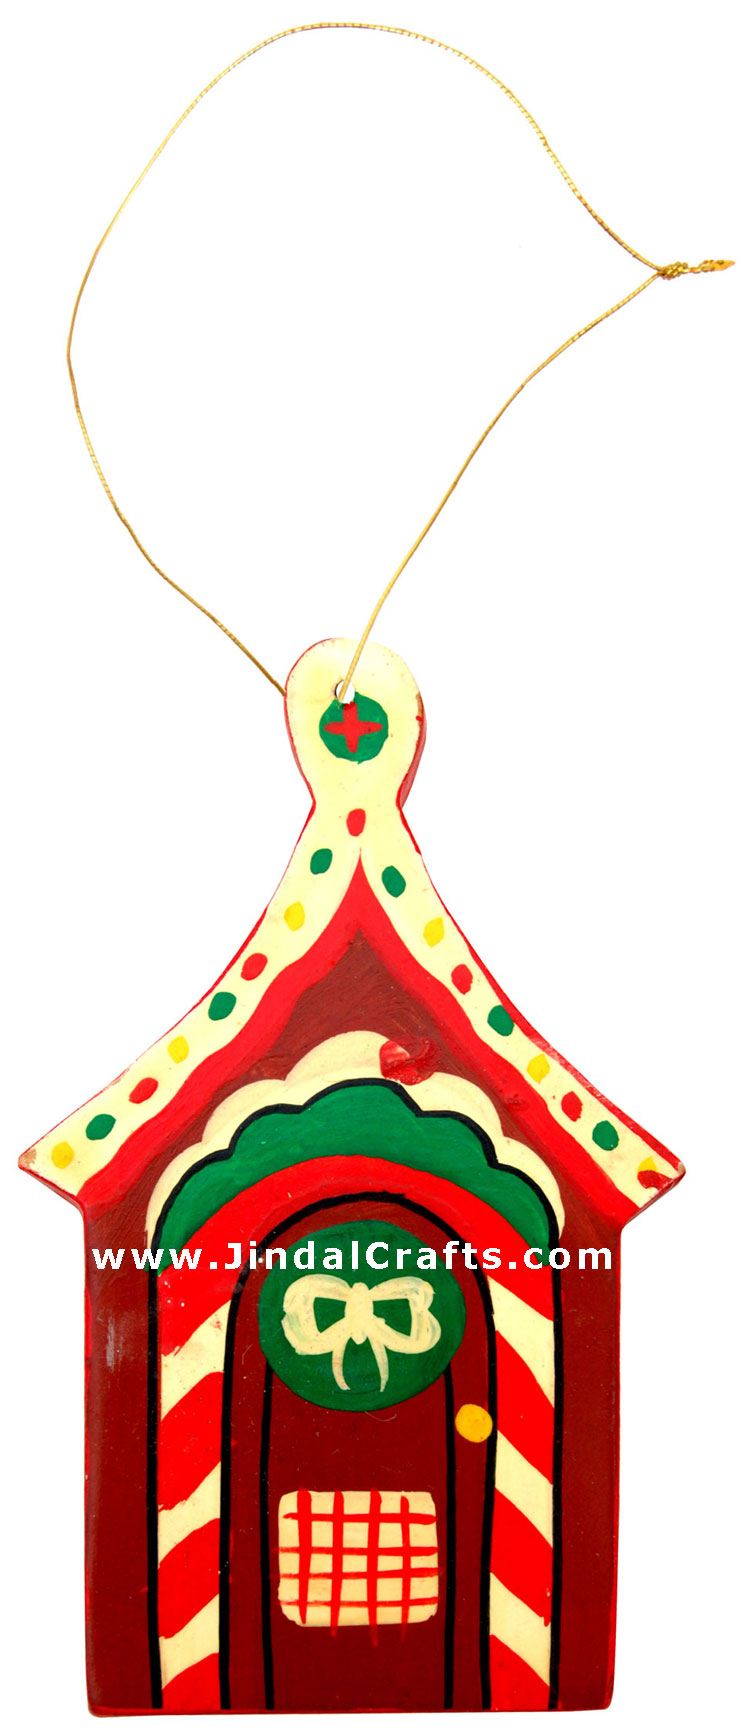 Handcrafted Handpainted Wood Christmas Hanging Ornament